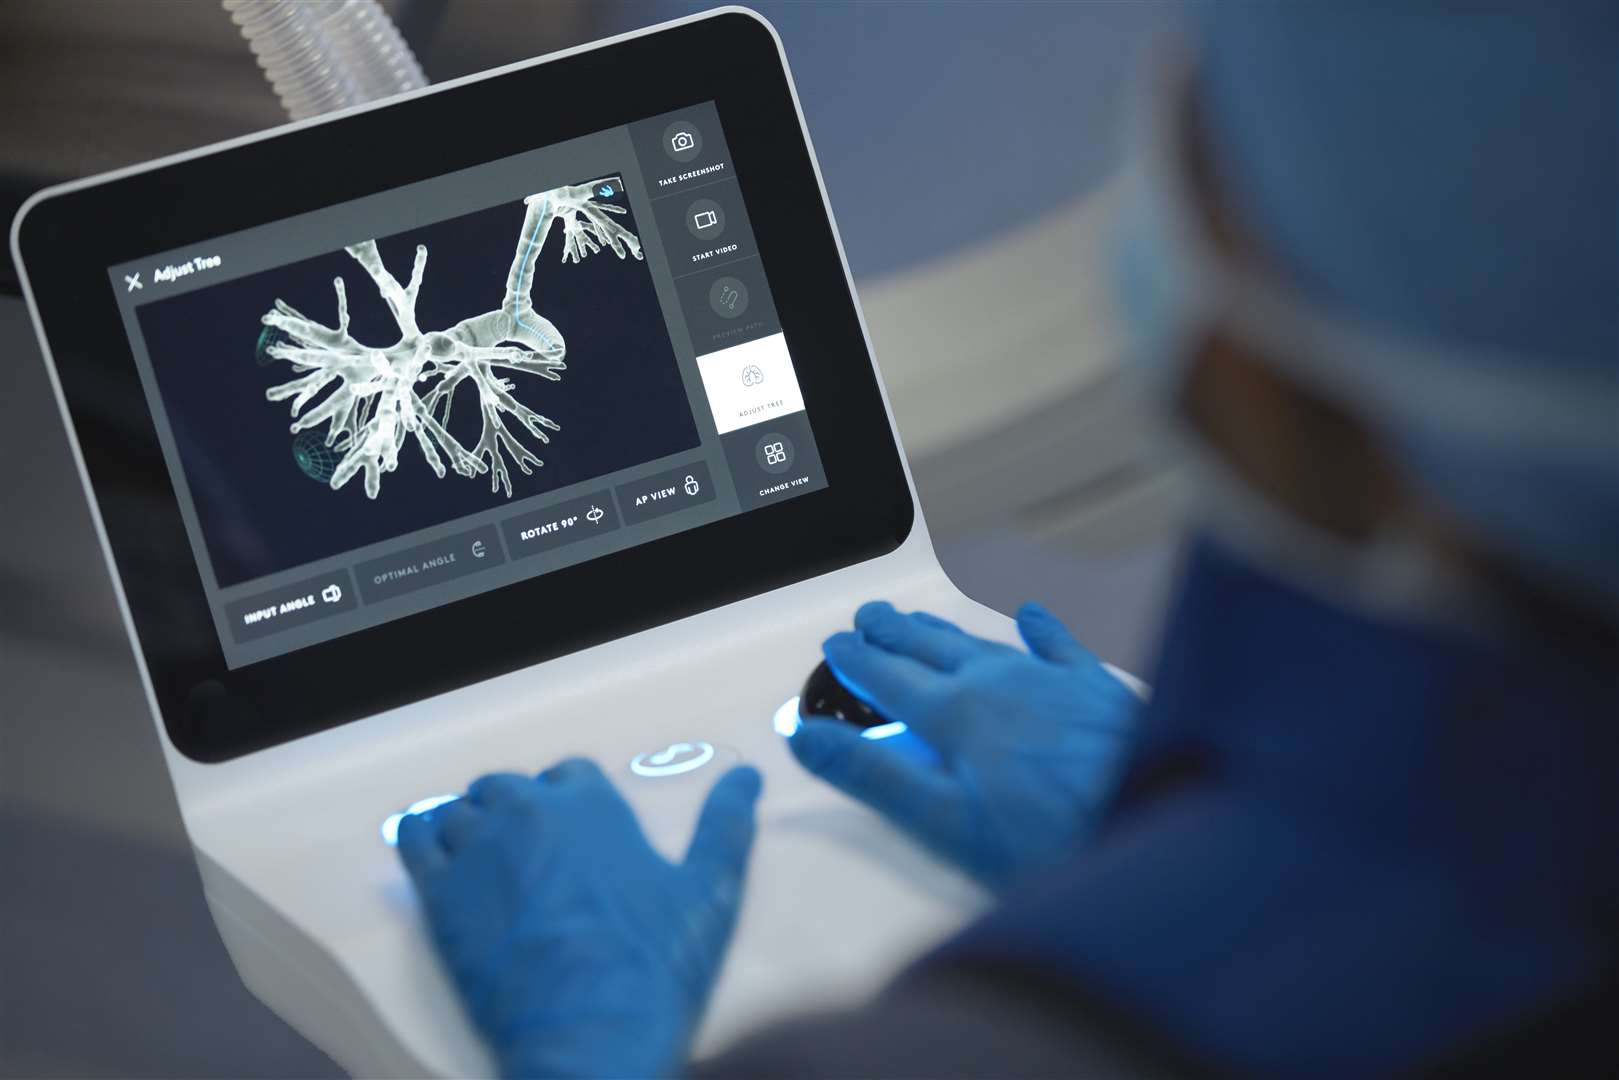 The Ion system gives clinicians access to hard-to-reach areas of the lung and allows them to take biopsies with greater precision (ION/PA)